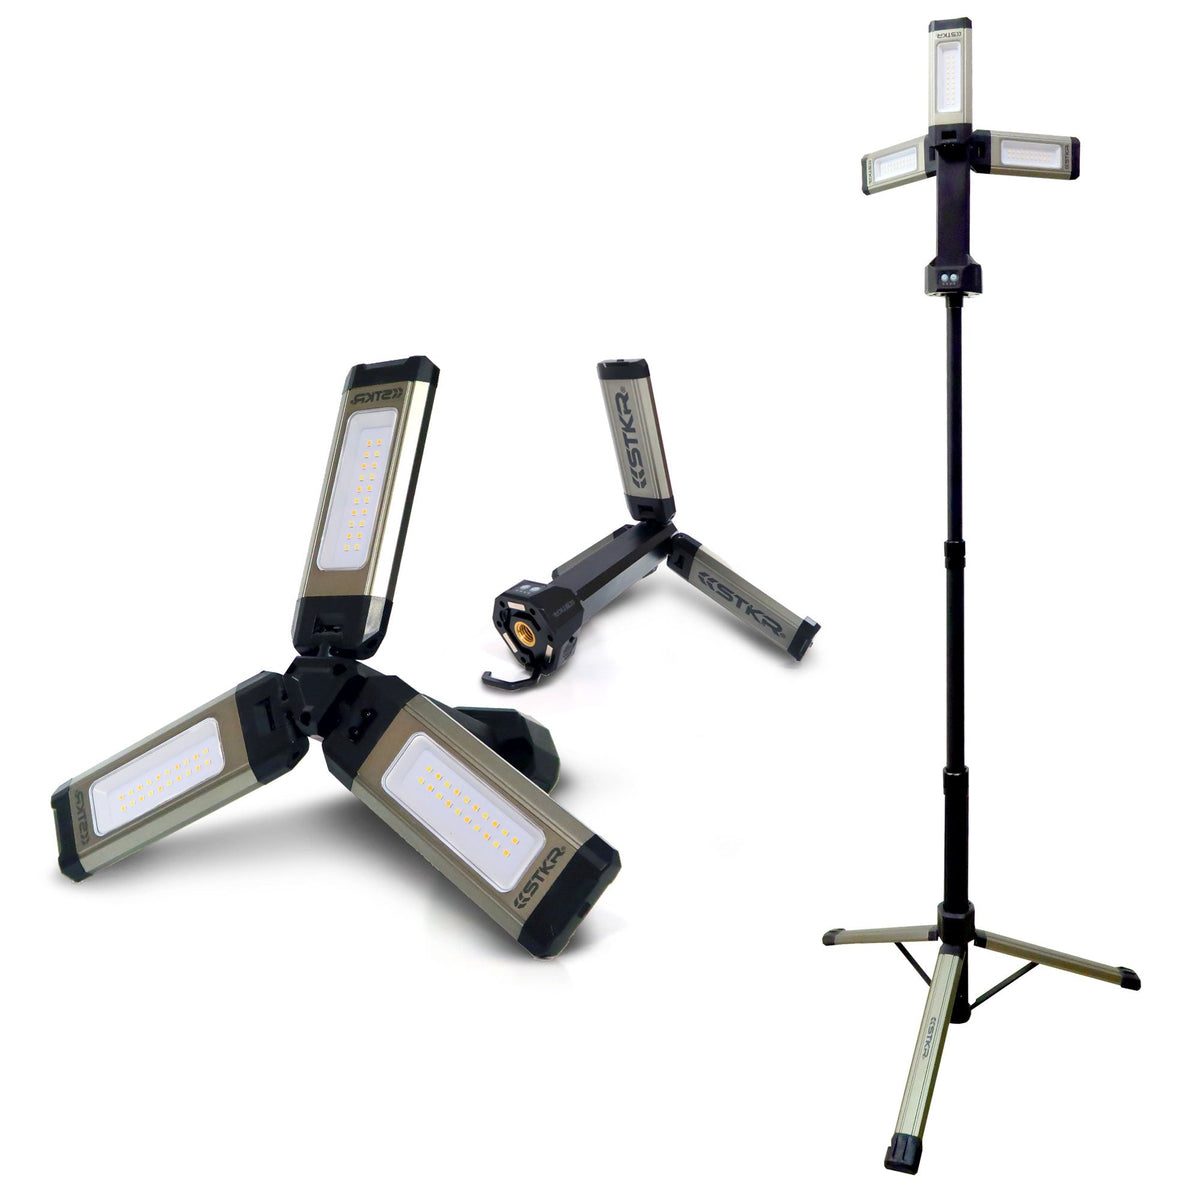 Tålmodighed Post blanding TRi-Mobile Light - Area Shoplight and Telescoping Tripod Stand - Risk Racing